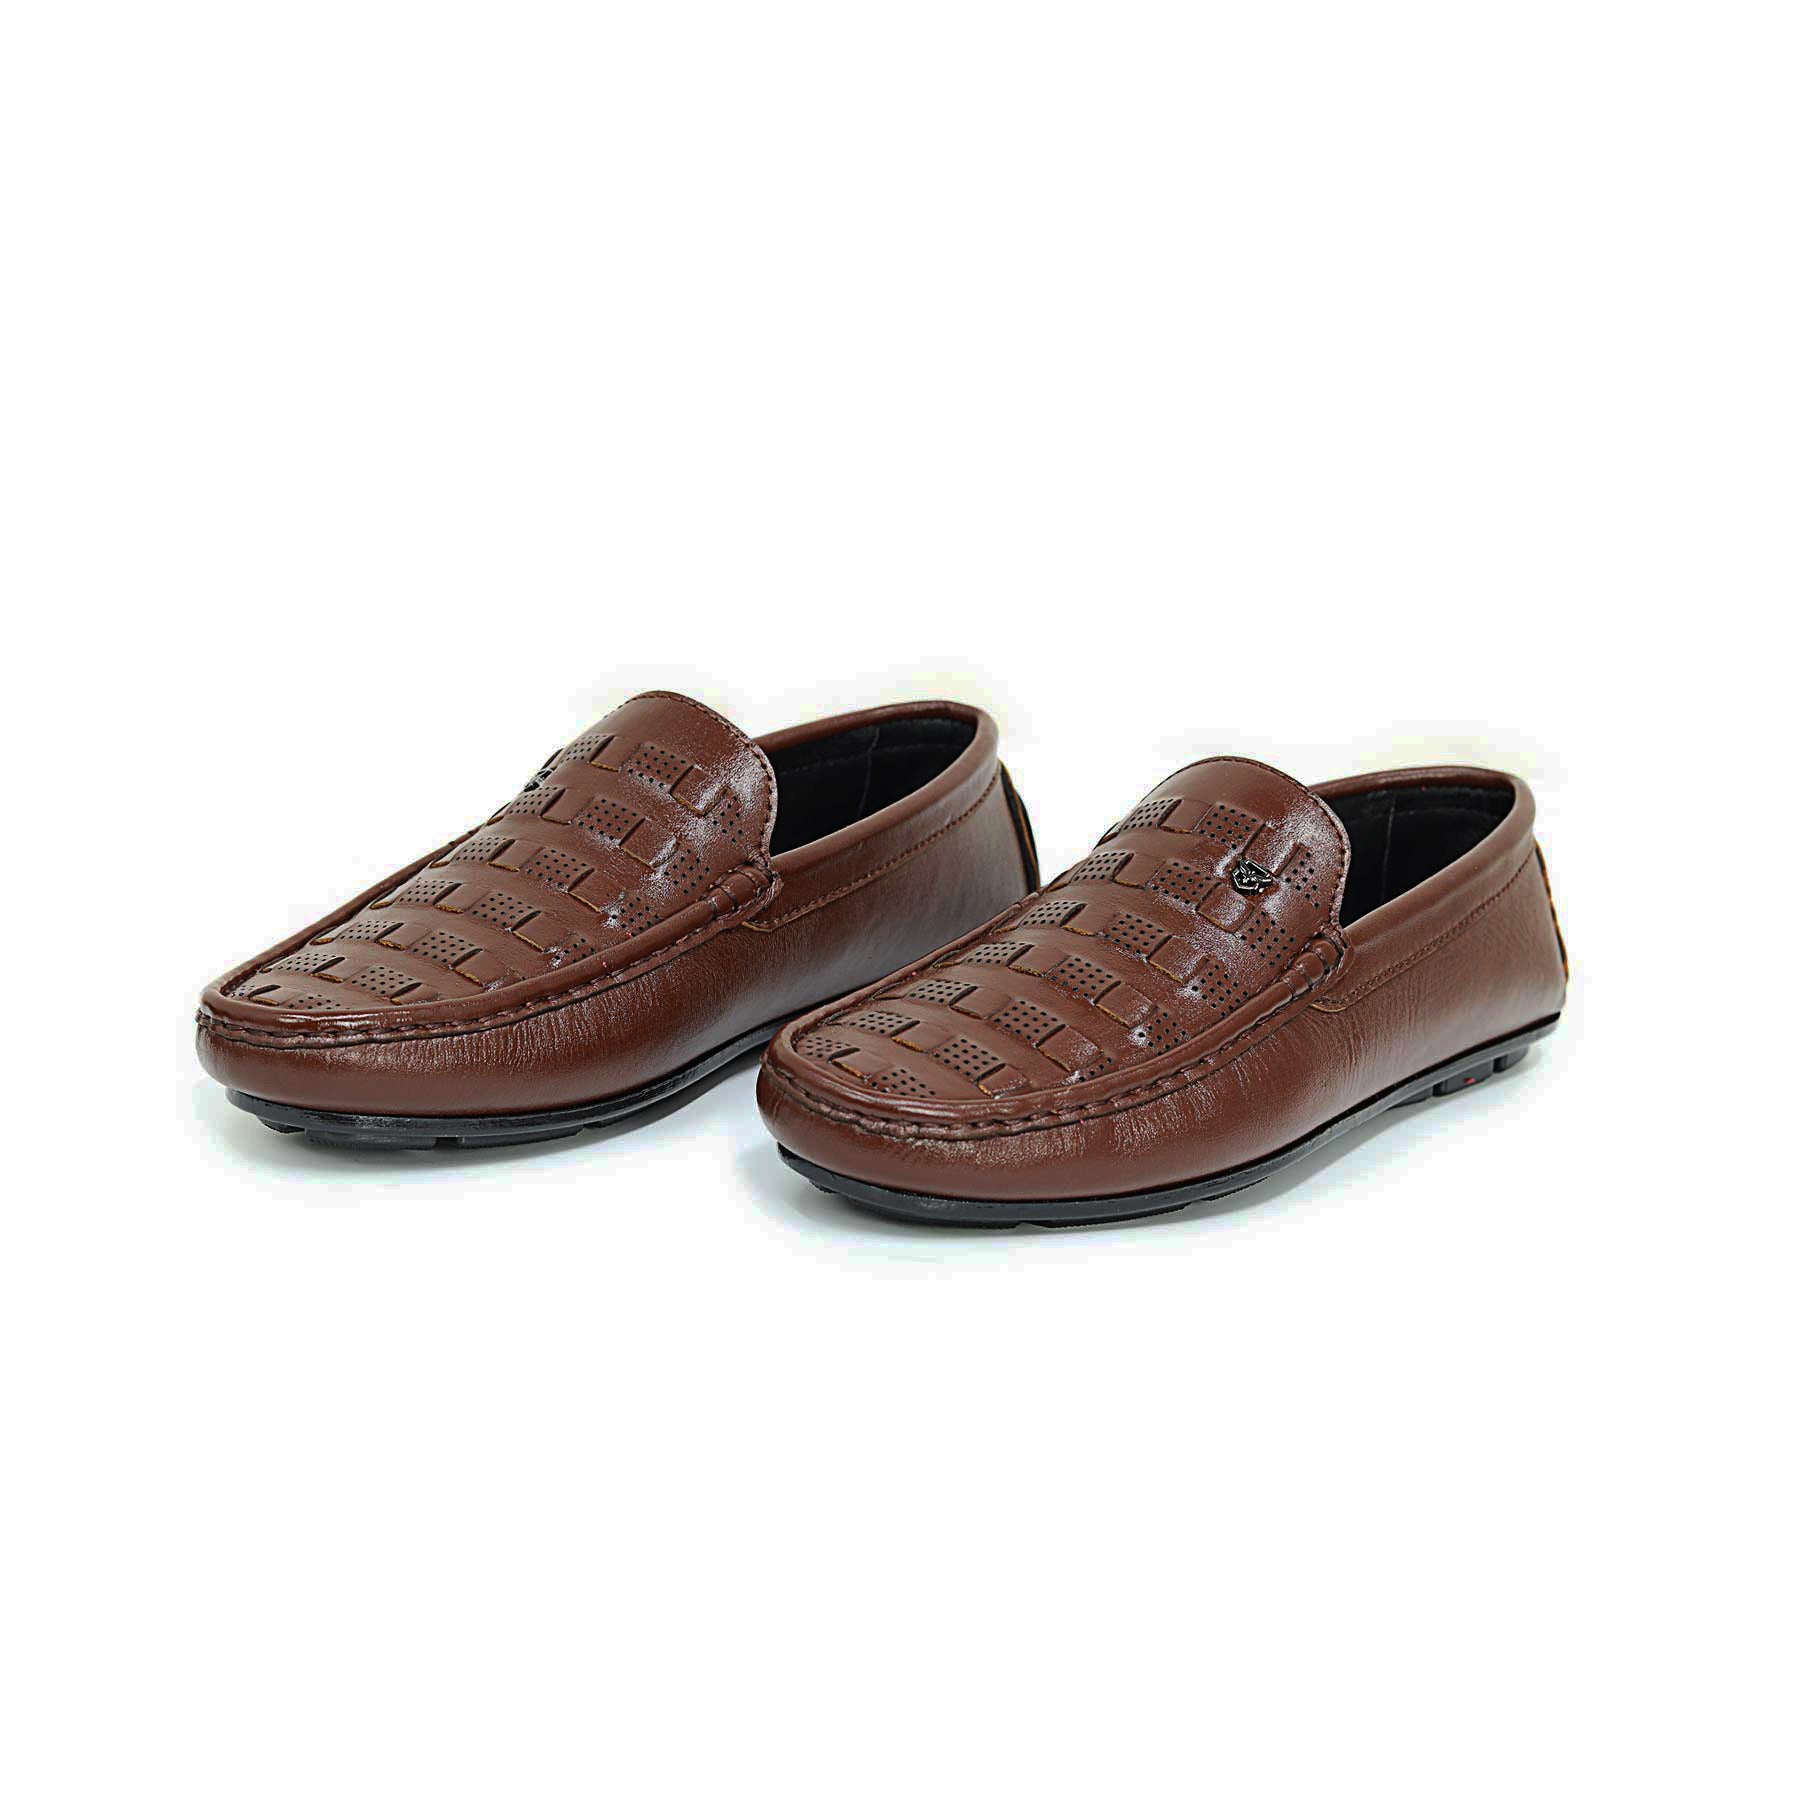 Zays Leather Loafer Shoe For Men (Chocolate) - SF51